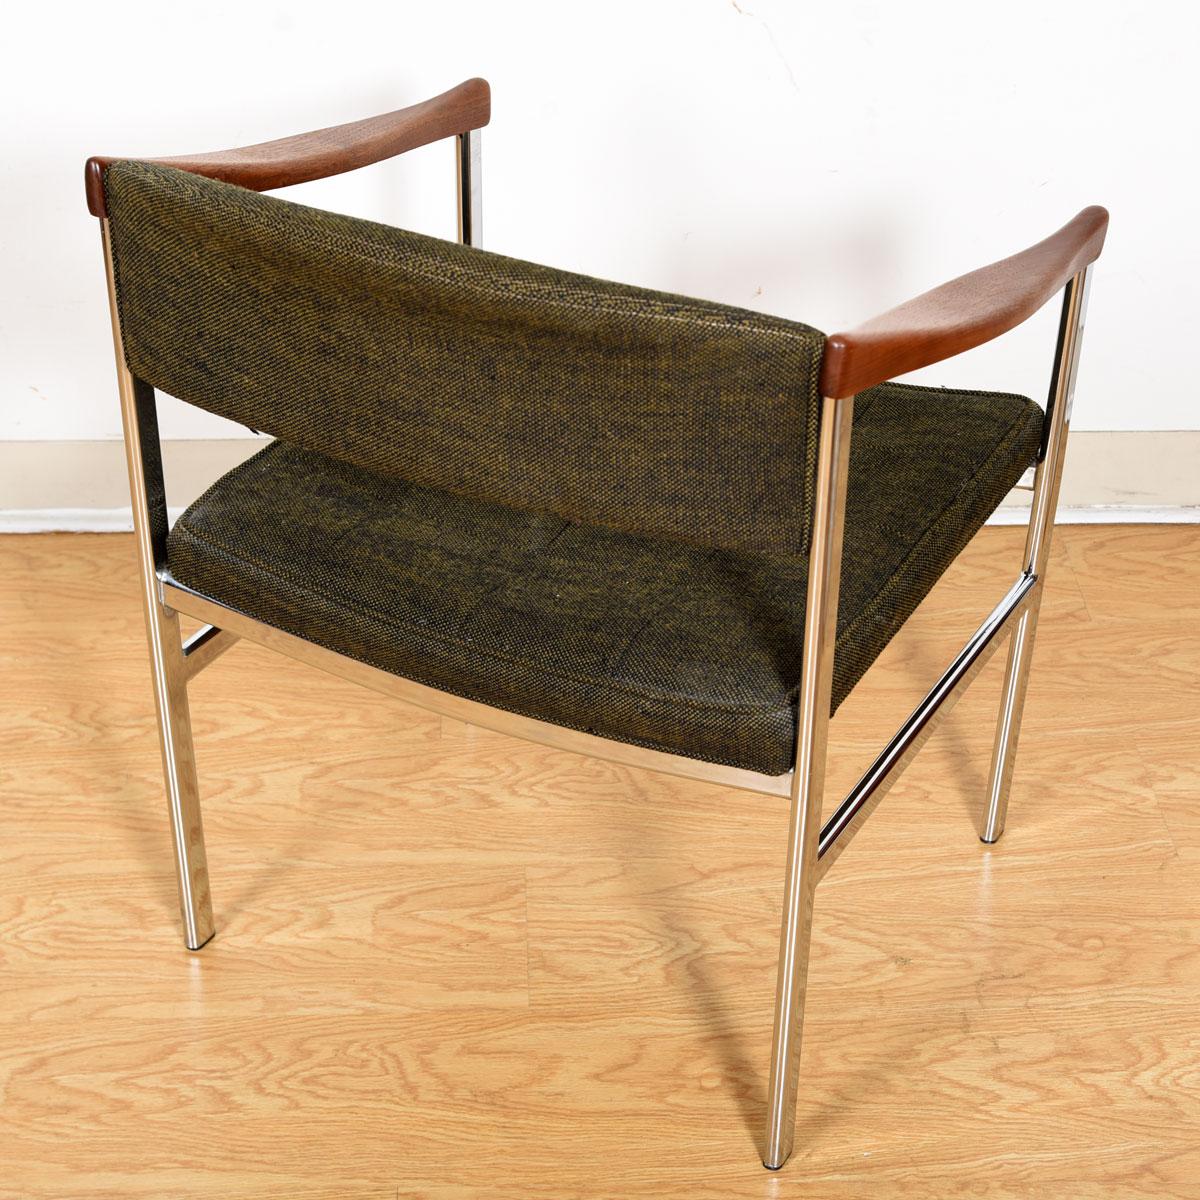 20th Century Midcentury Accent Chair with Chrome Legs + Sculpted Wood Armrests For Sale